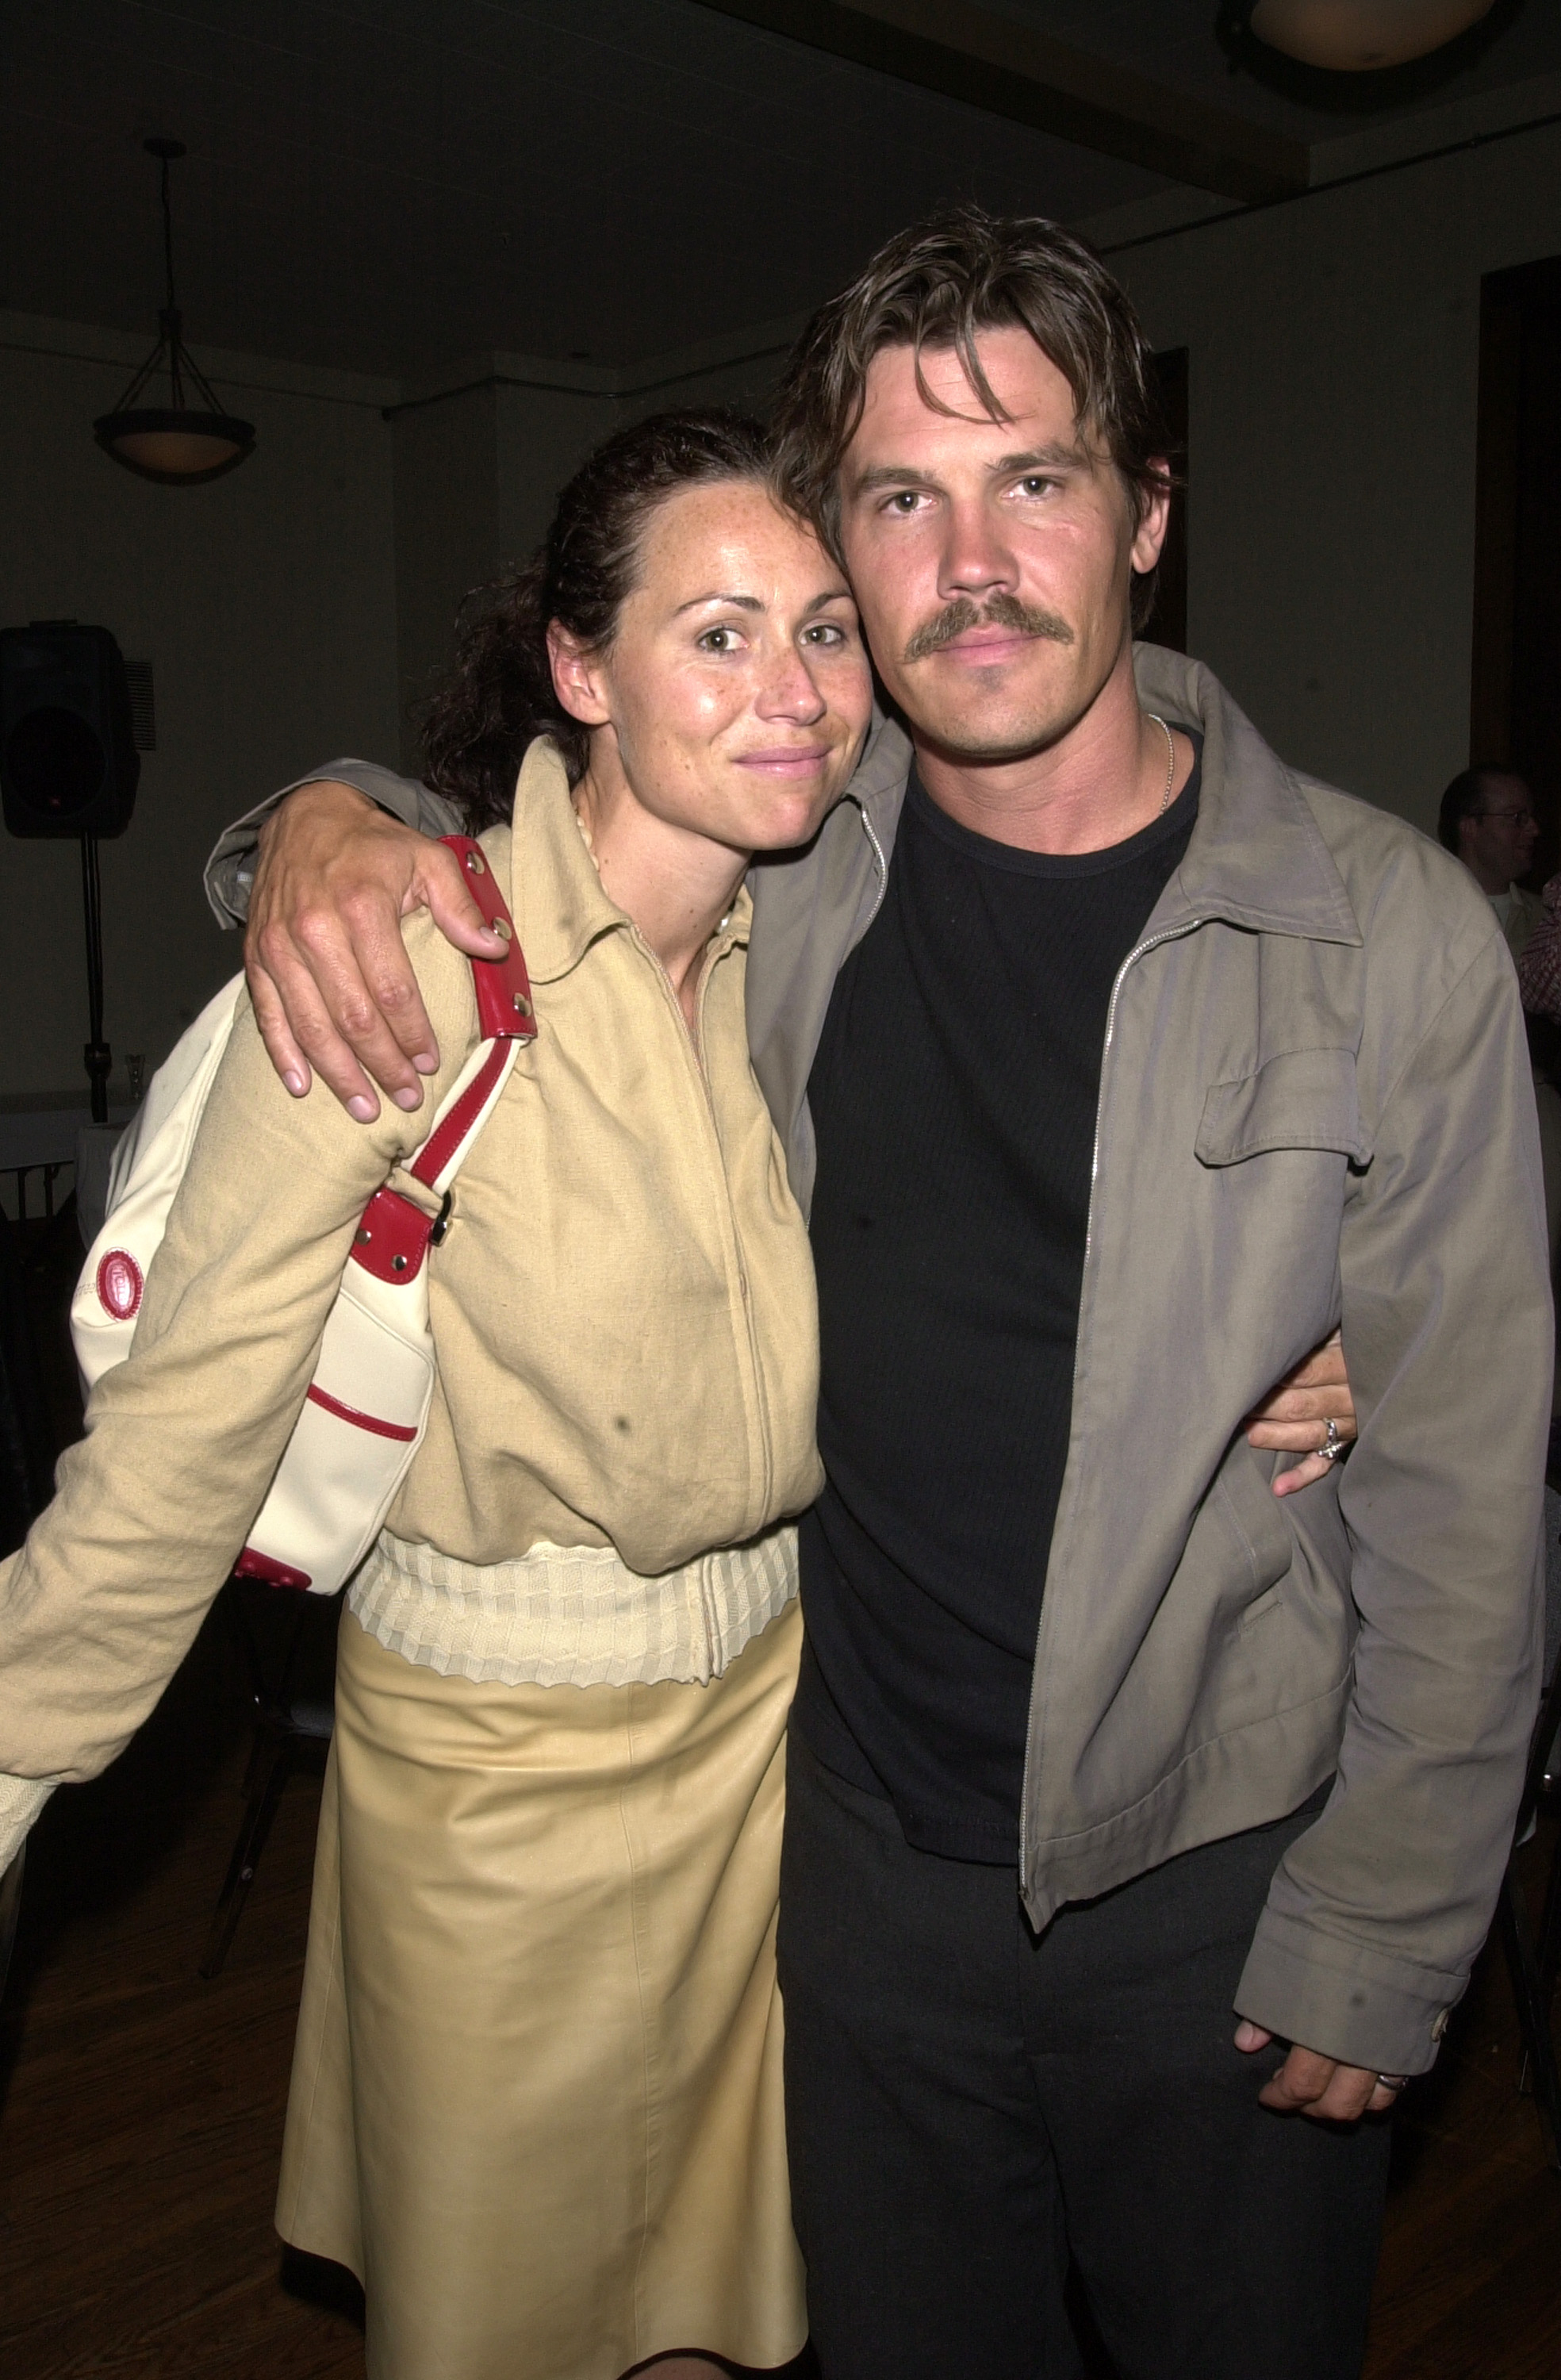 Minnie Driver and Josh Brolin at Anthony Edwards Indy 500 party for Cure Autism Now(CAN) in Indianapolis, Indiana, United States. | Source: Getty Images